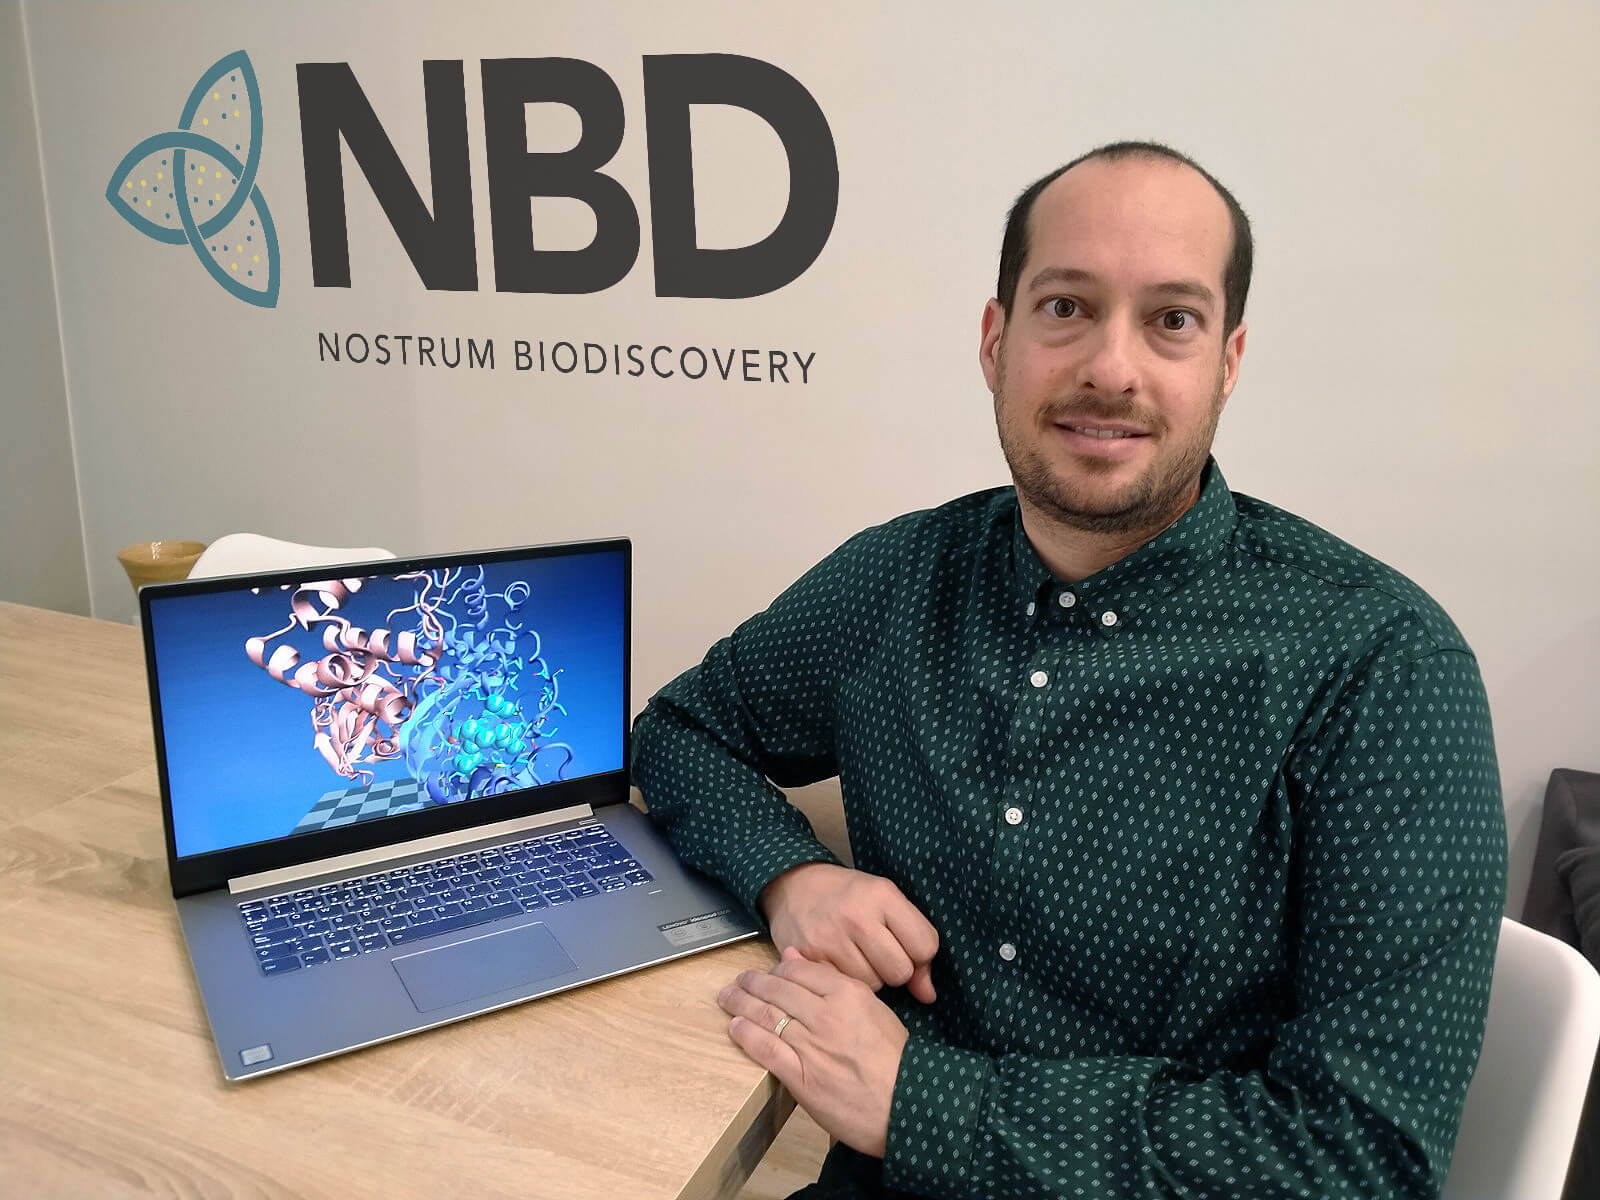 Nostrum Biodiscovery appoints Ezequiel Mas as its new CEO and embarks on an ambitious expansion plan